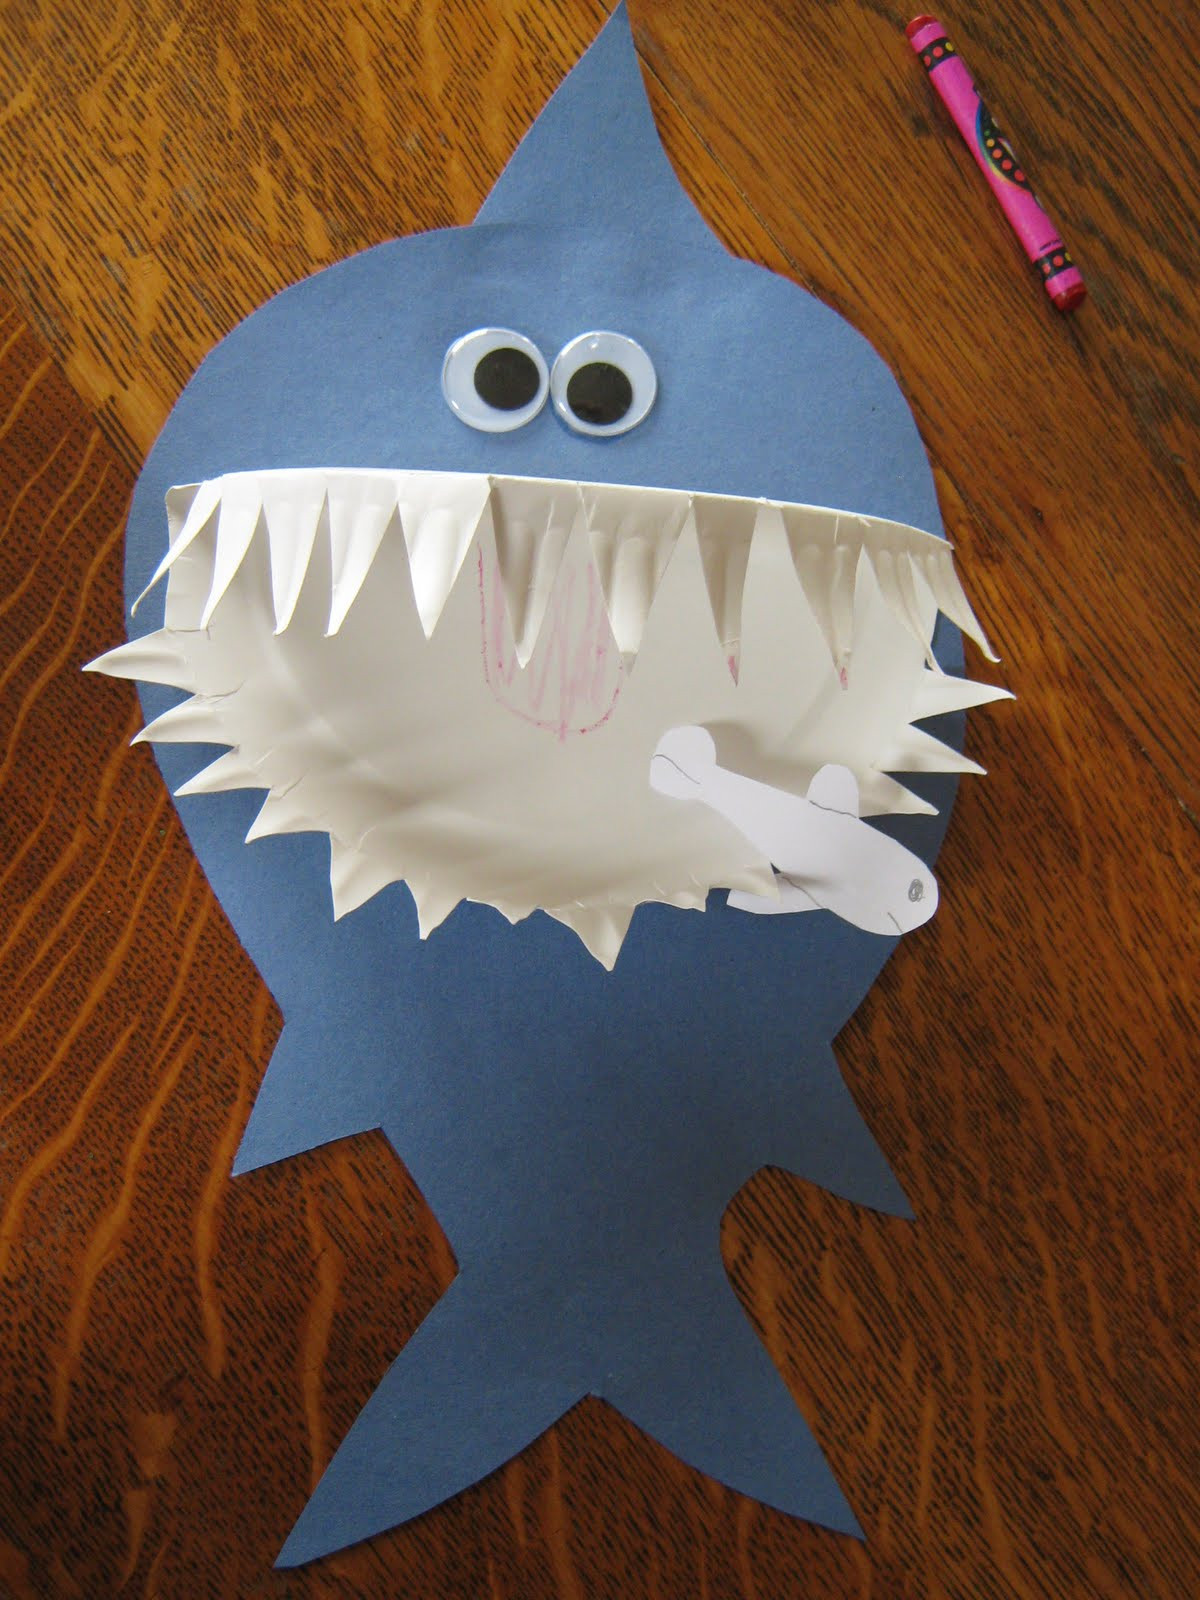 Toddler Art And Craft Ideas
 Almost Unschoolers Paper Plate Shark Craft